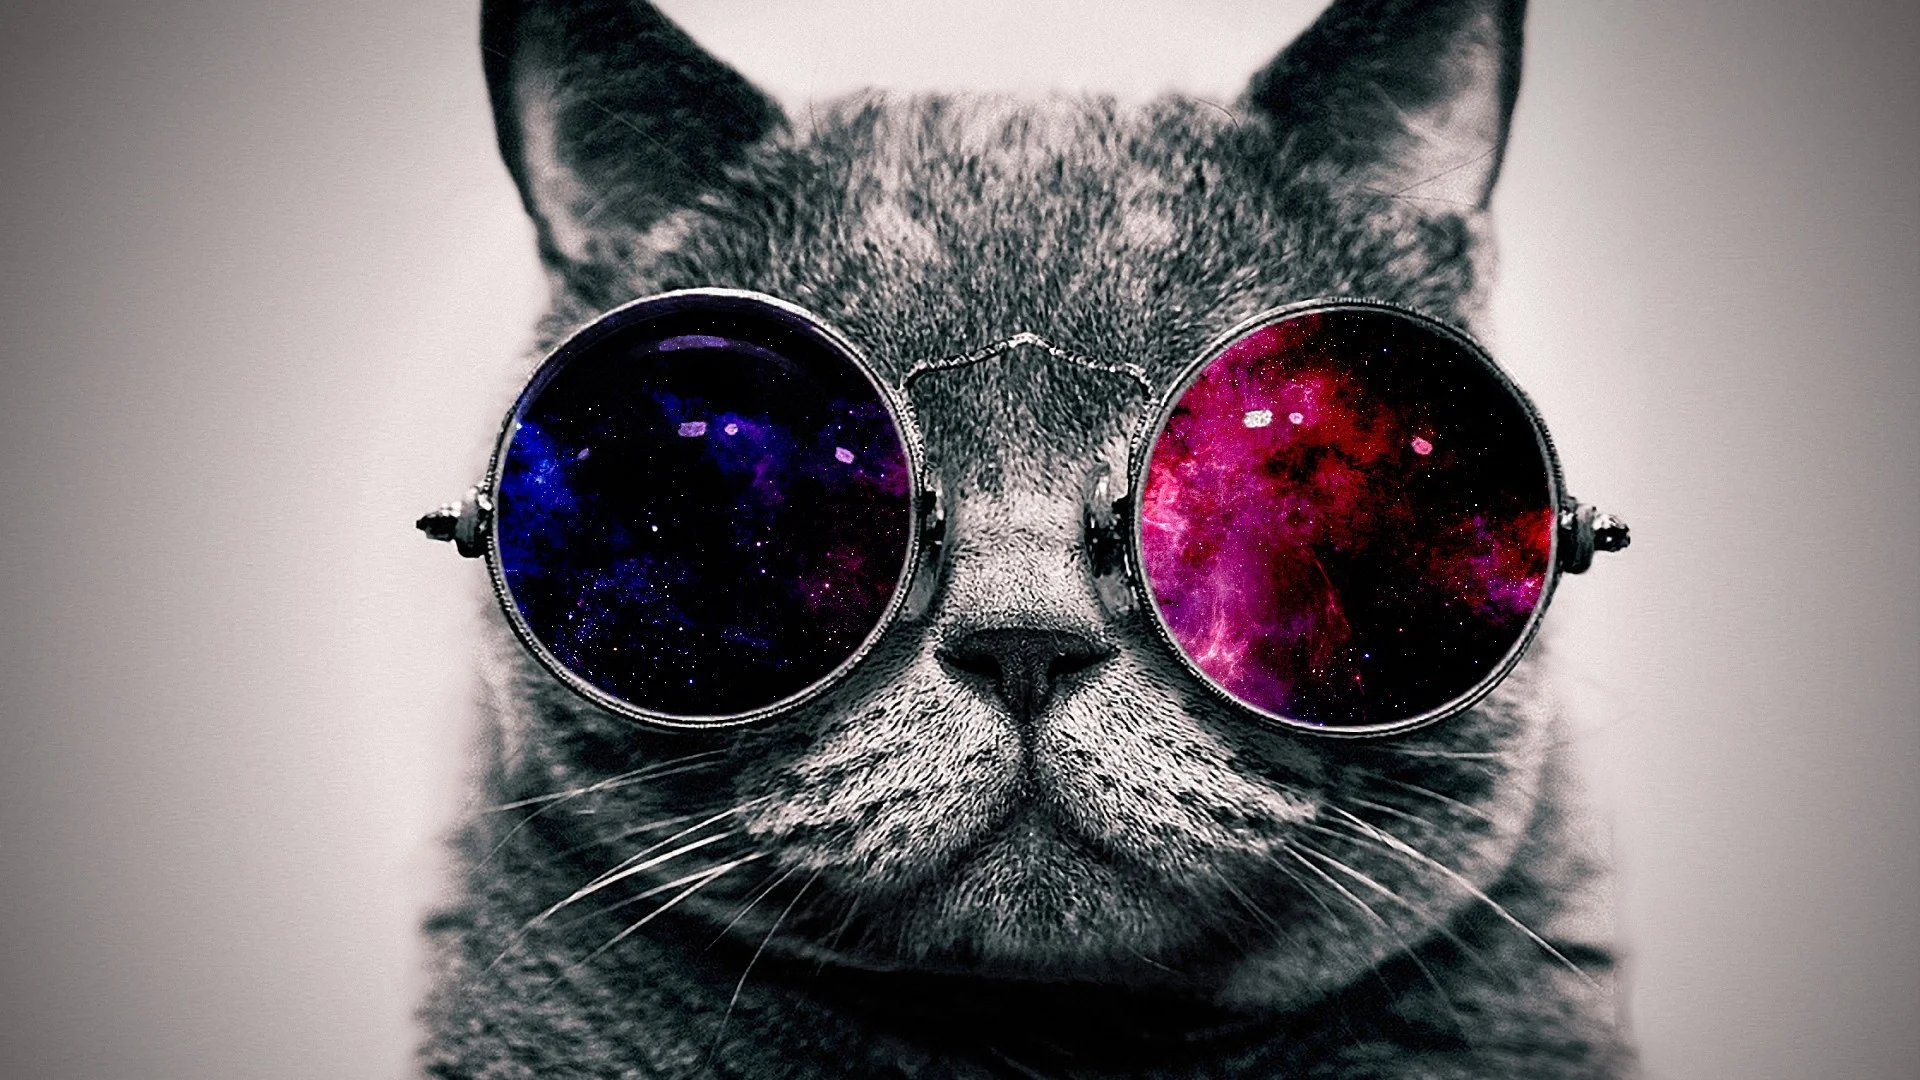 Cat_face_glasses_thick_65455_1920x1080